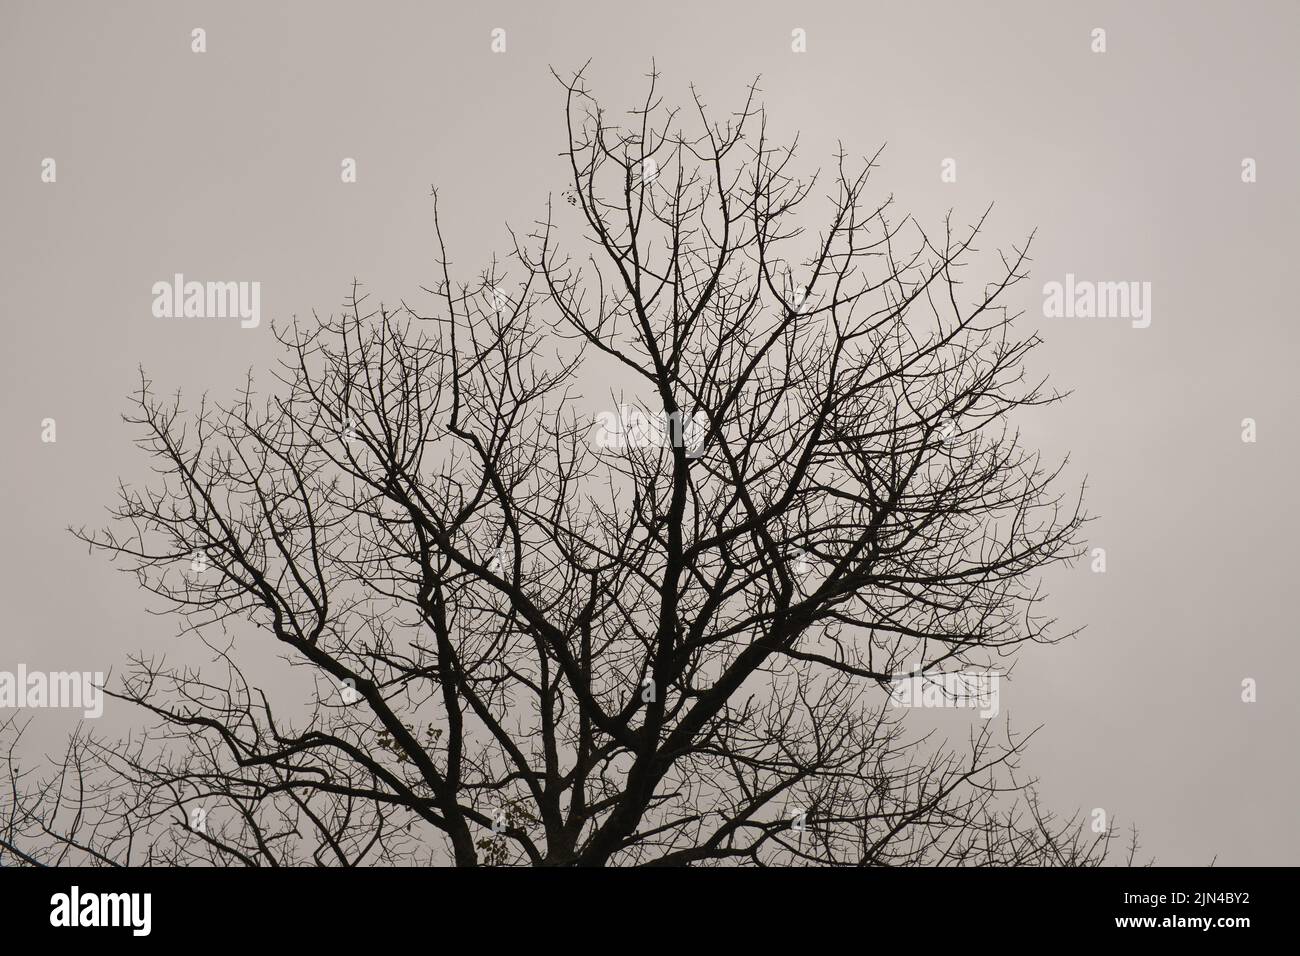 Silhouette of Bare Tree Branches against Cloudy Sky Stock Photo